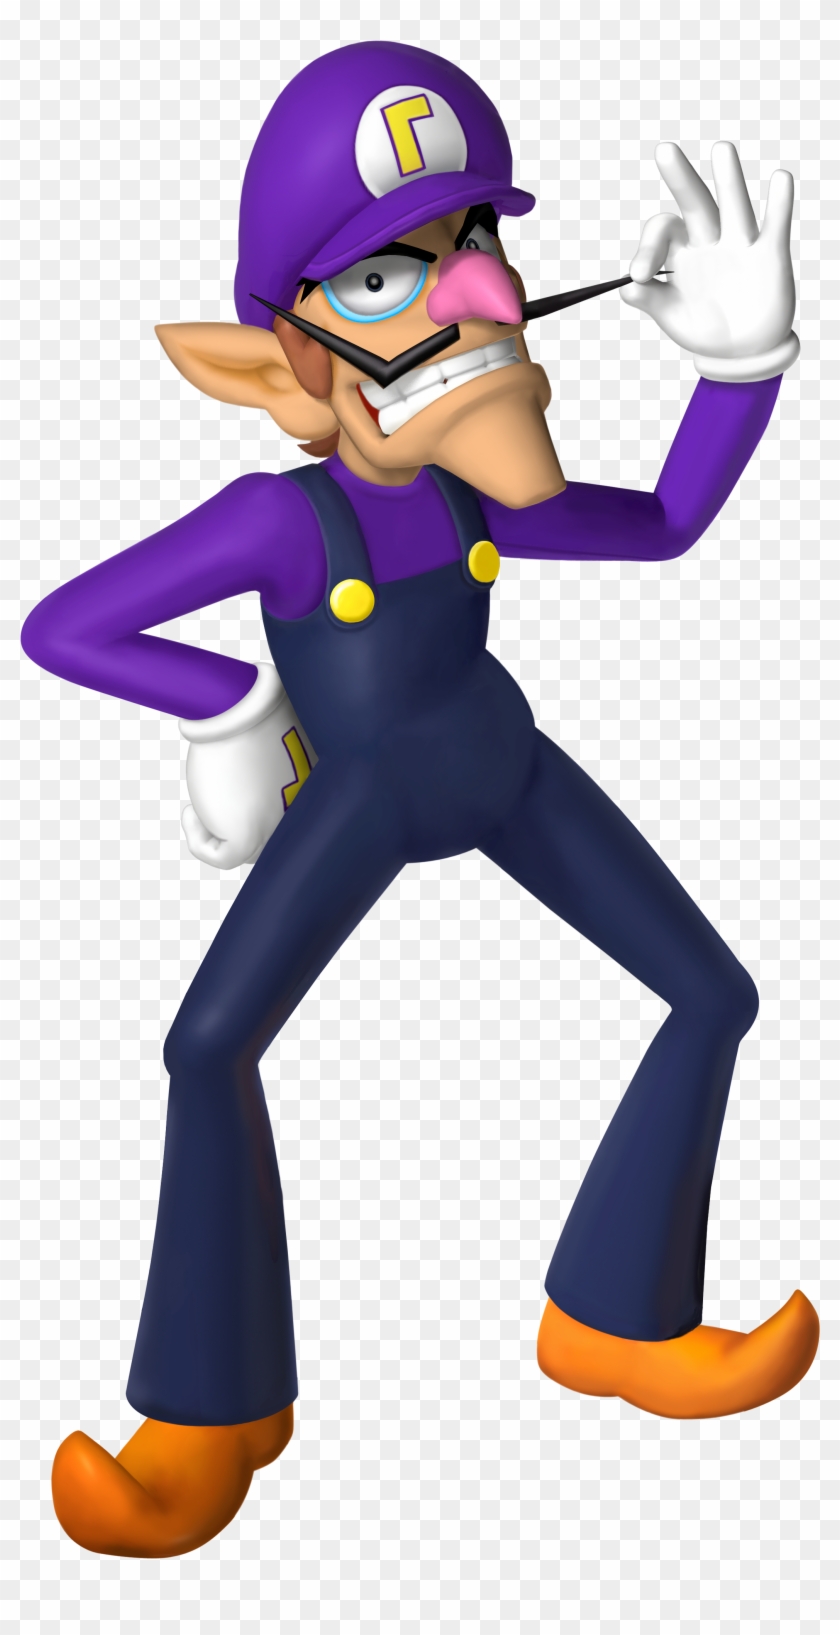 The Lean, Mean, Purple Machine Takes The Top Of This - Wario And Waluigi #1745283